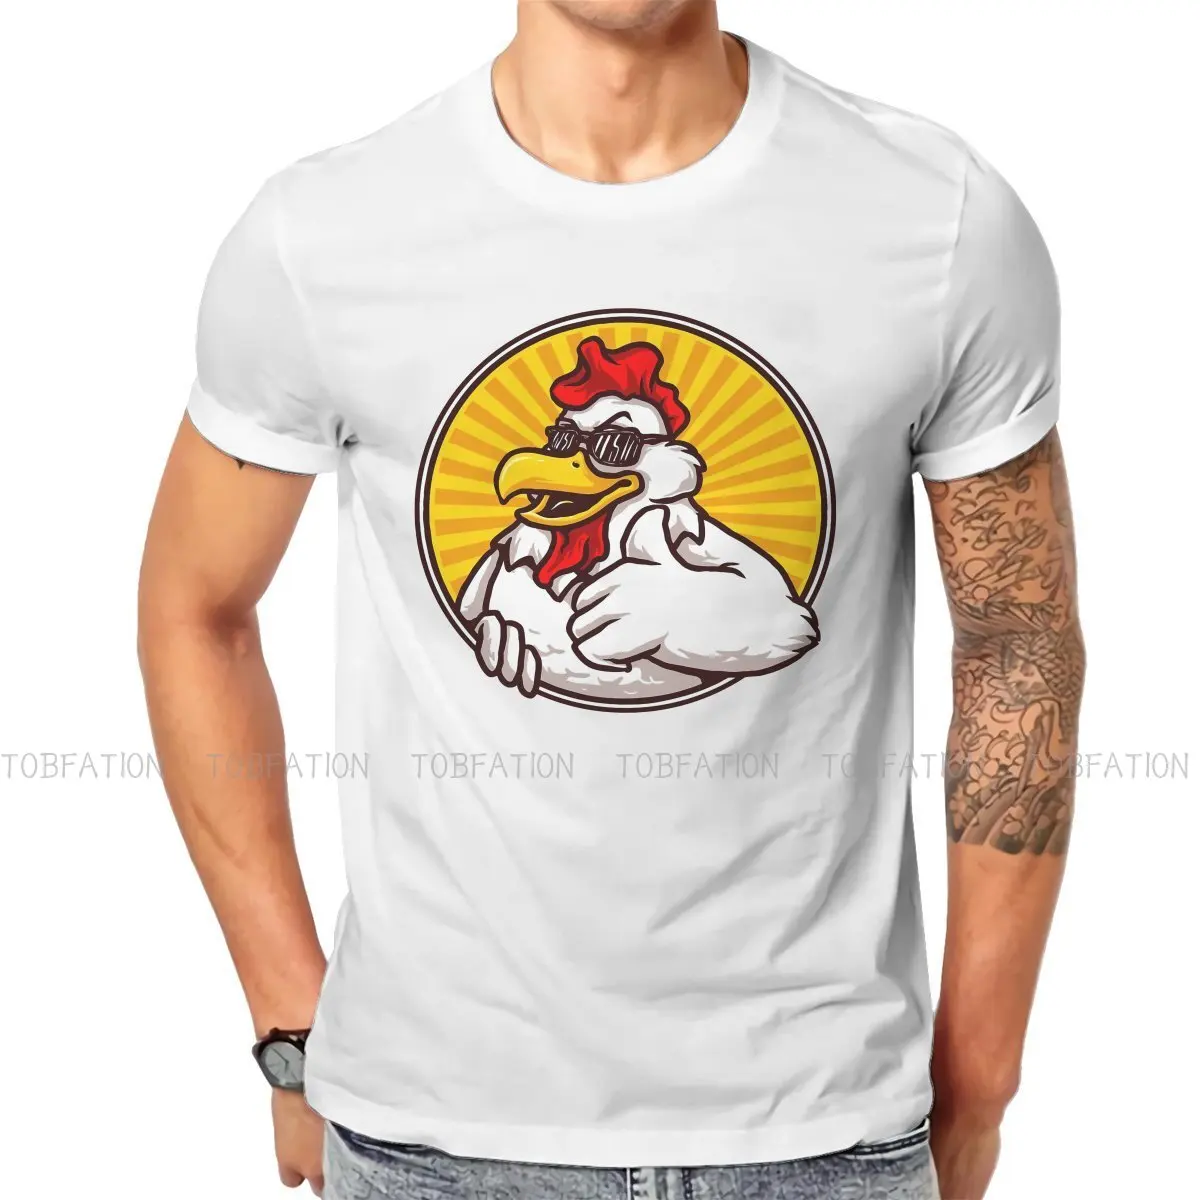 

Cool Chicken Funny Clever Chase TShirt for Men Mascot Classic Basic Leisure Sweatshirts T Shirt Novelty New Design Loose